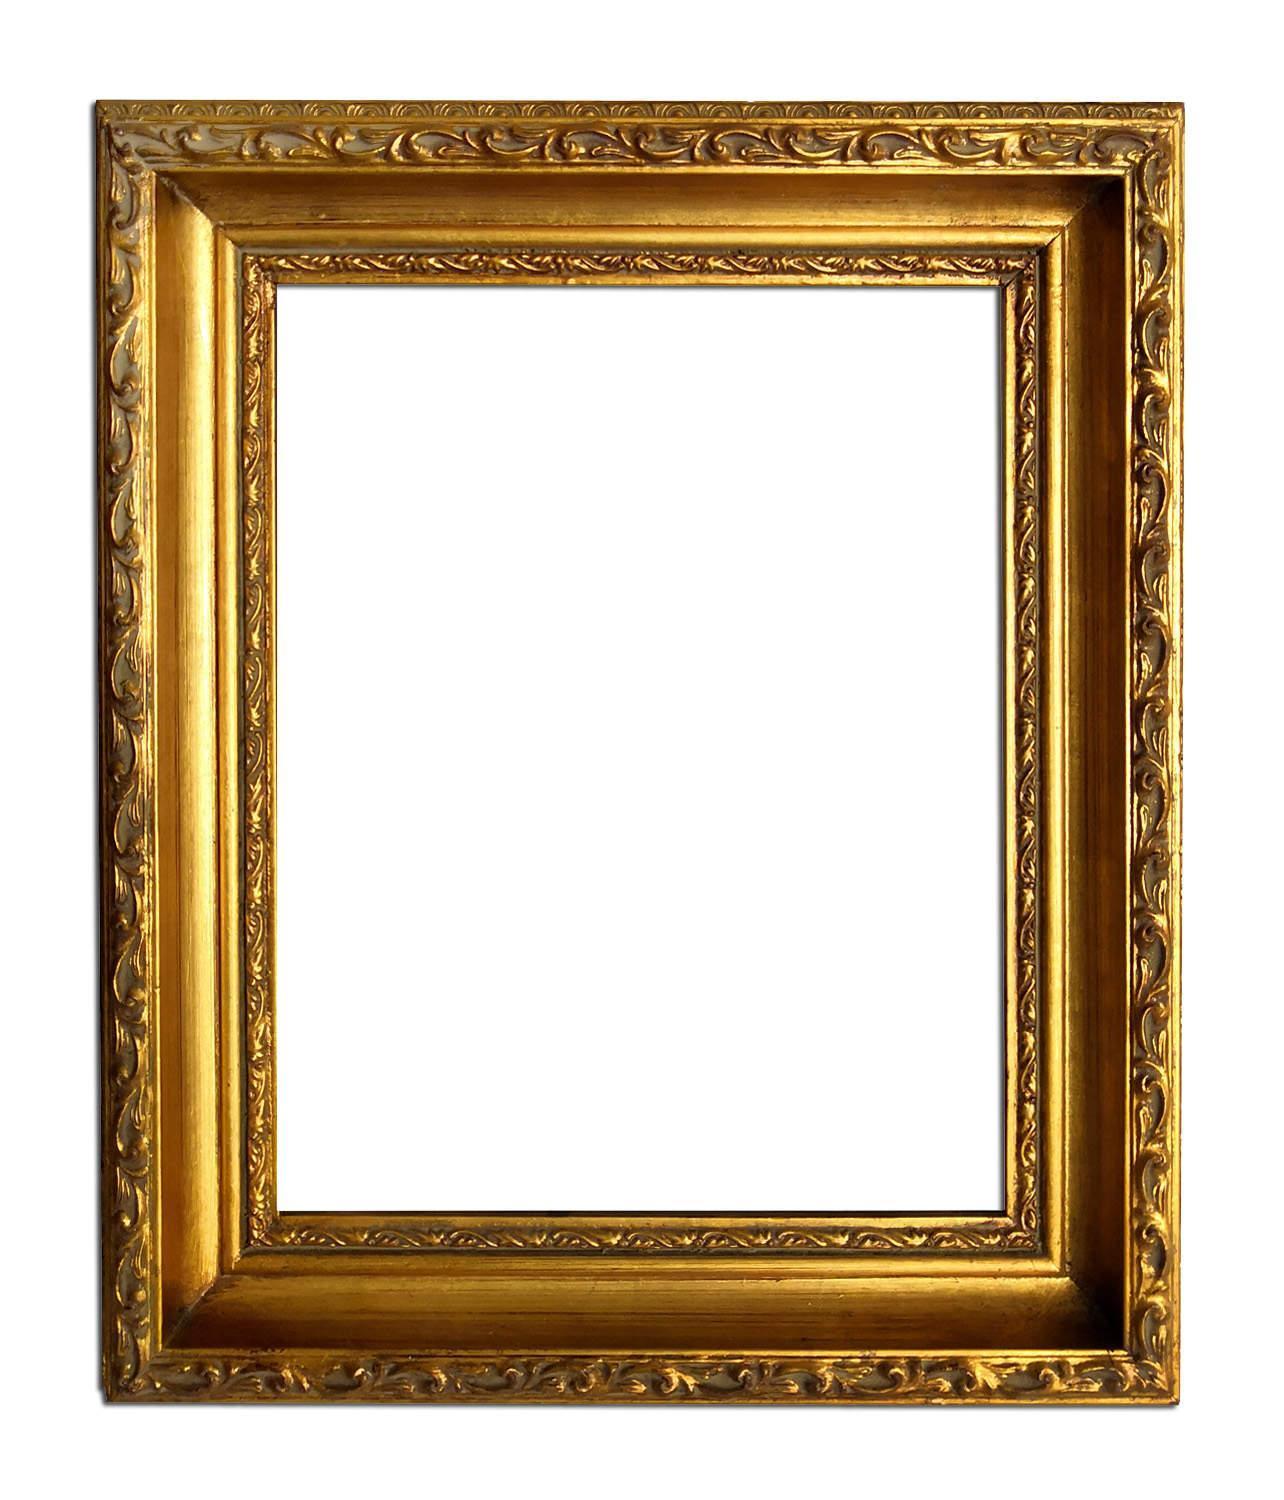 35x45 cm or 14x18 ins, wooden photo frame